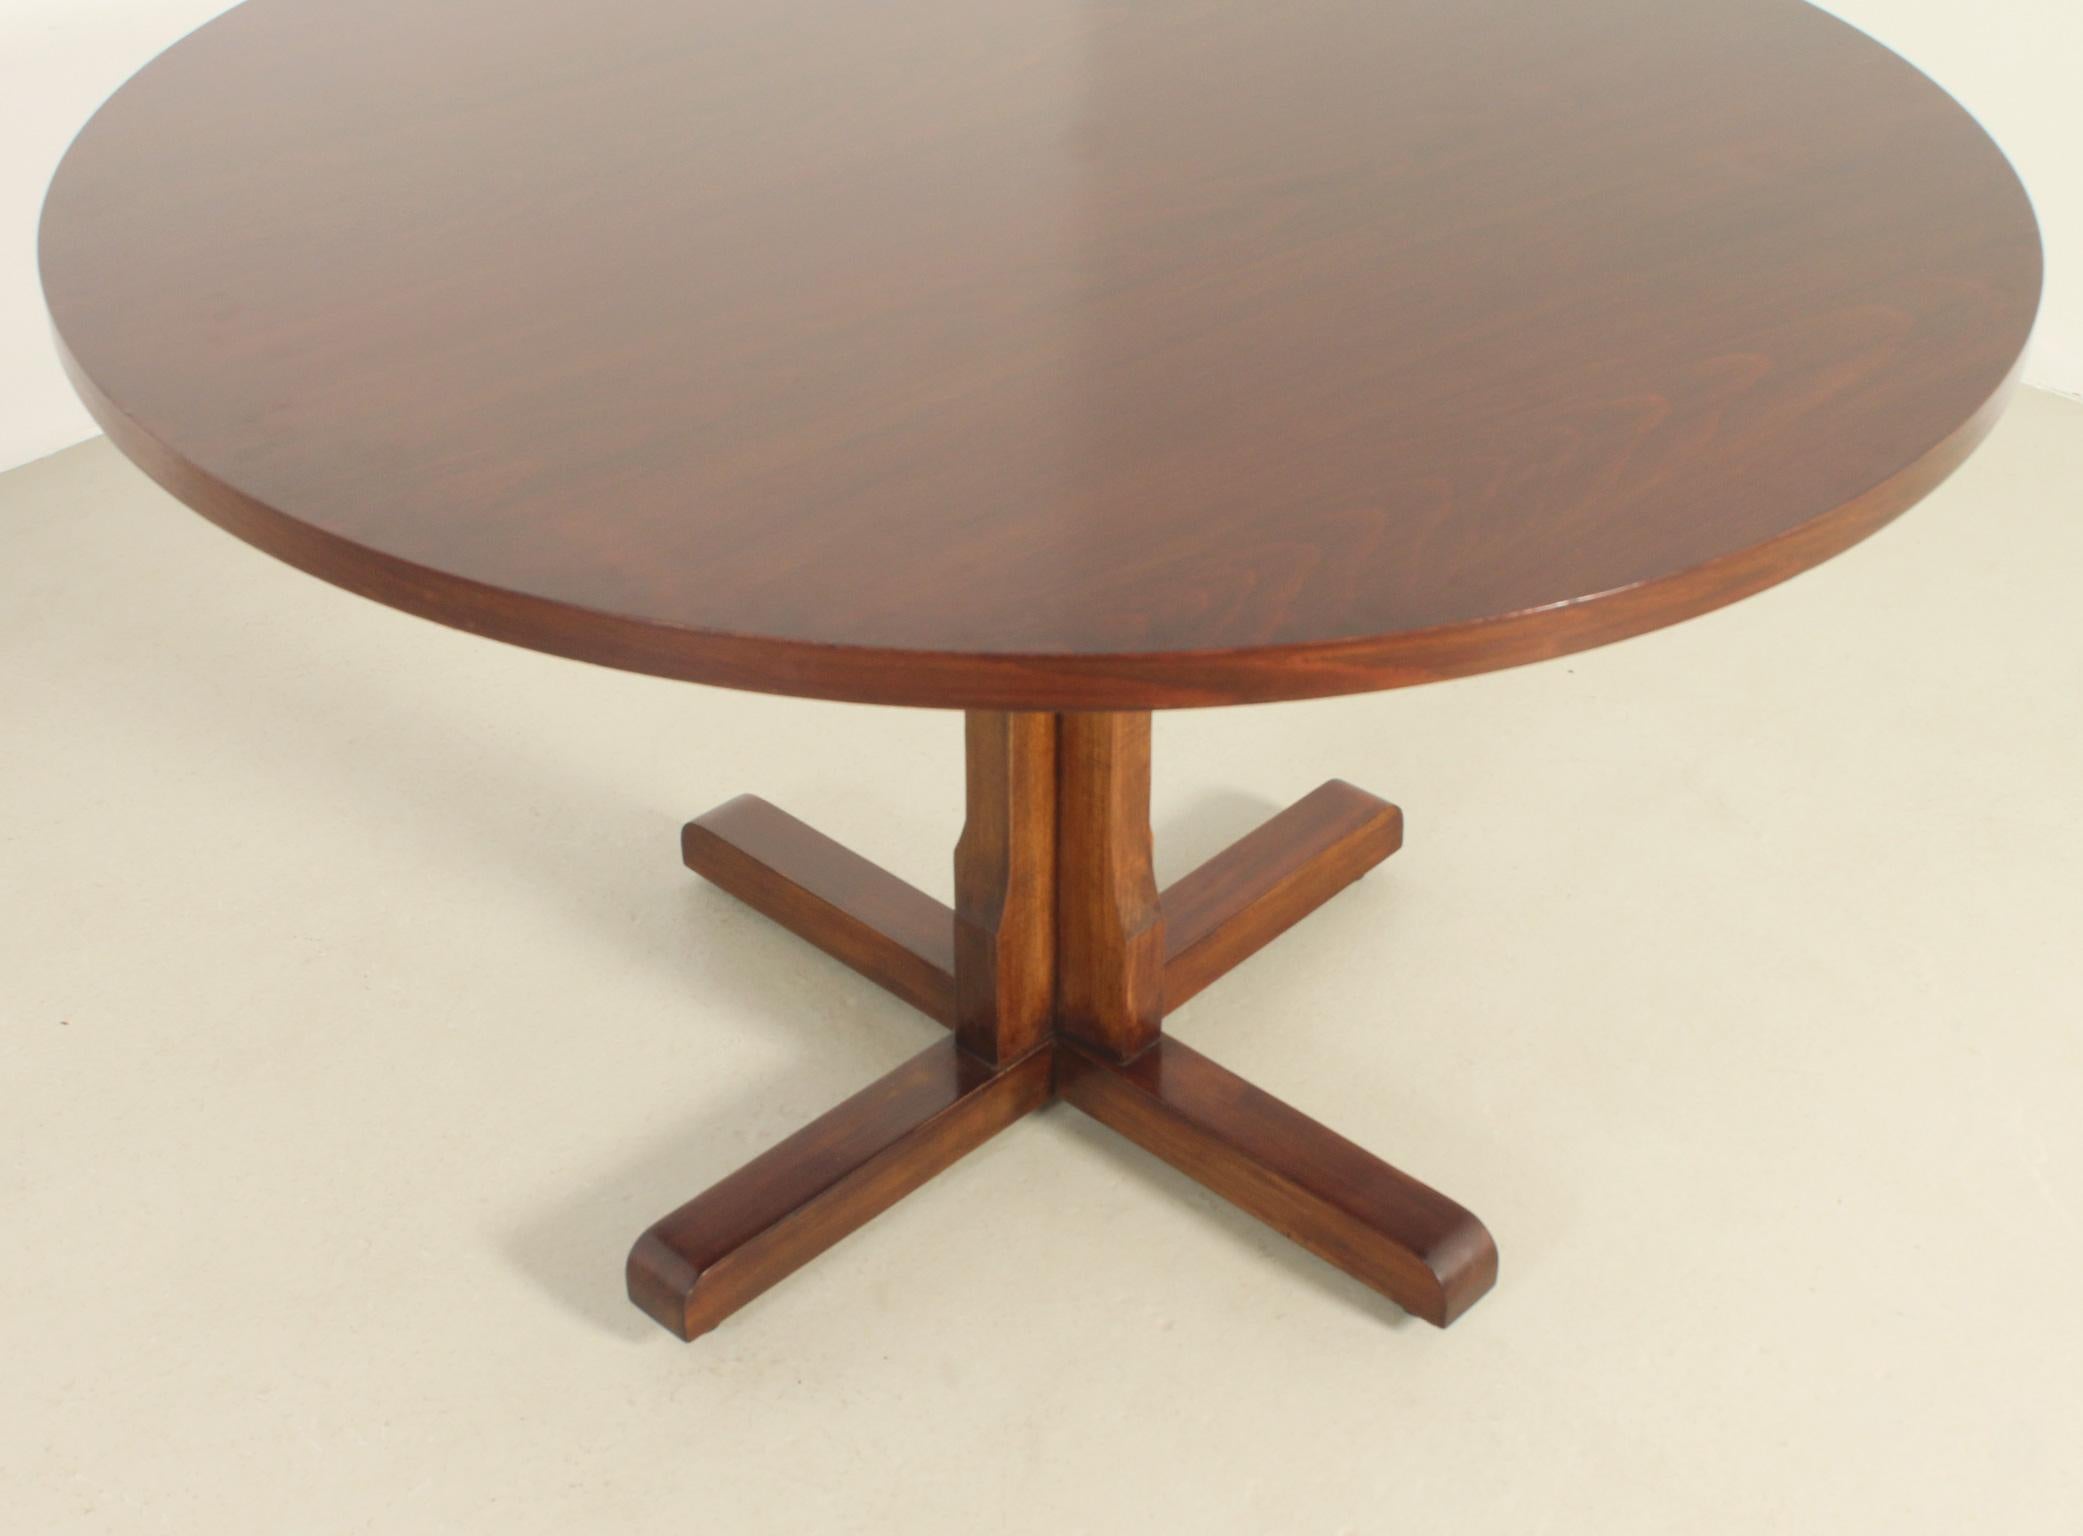 Round Dining Table in Walnut Wood by Jordi Vilanova, Spain, 1960's For Sale 1